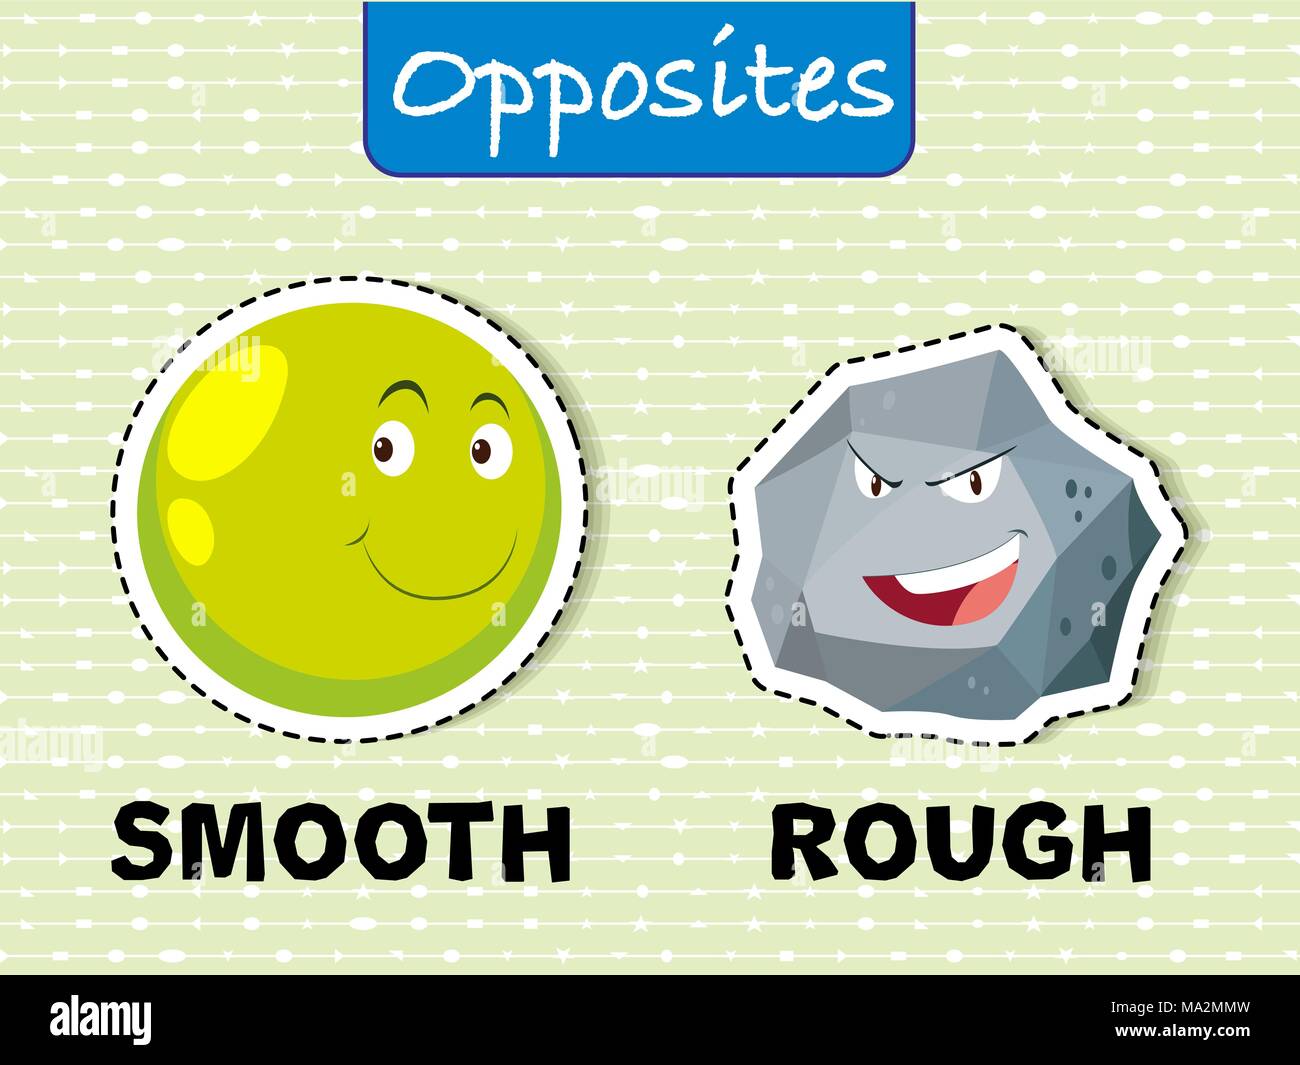 Rough Smooth Opposite Stock Illustrations – 1 Rough Smooth